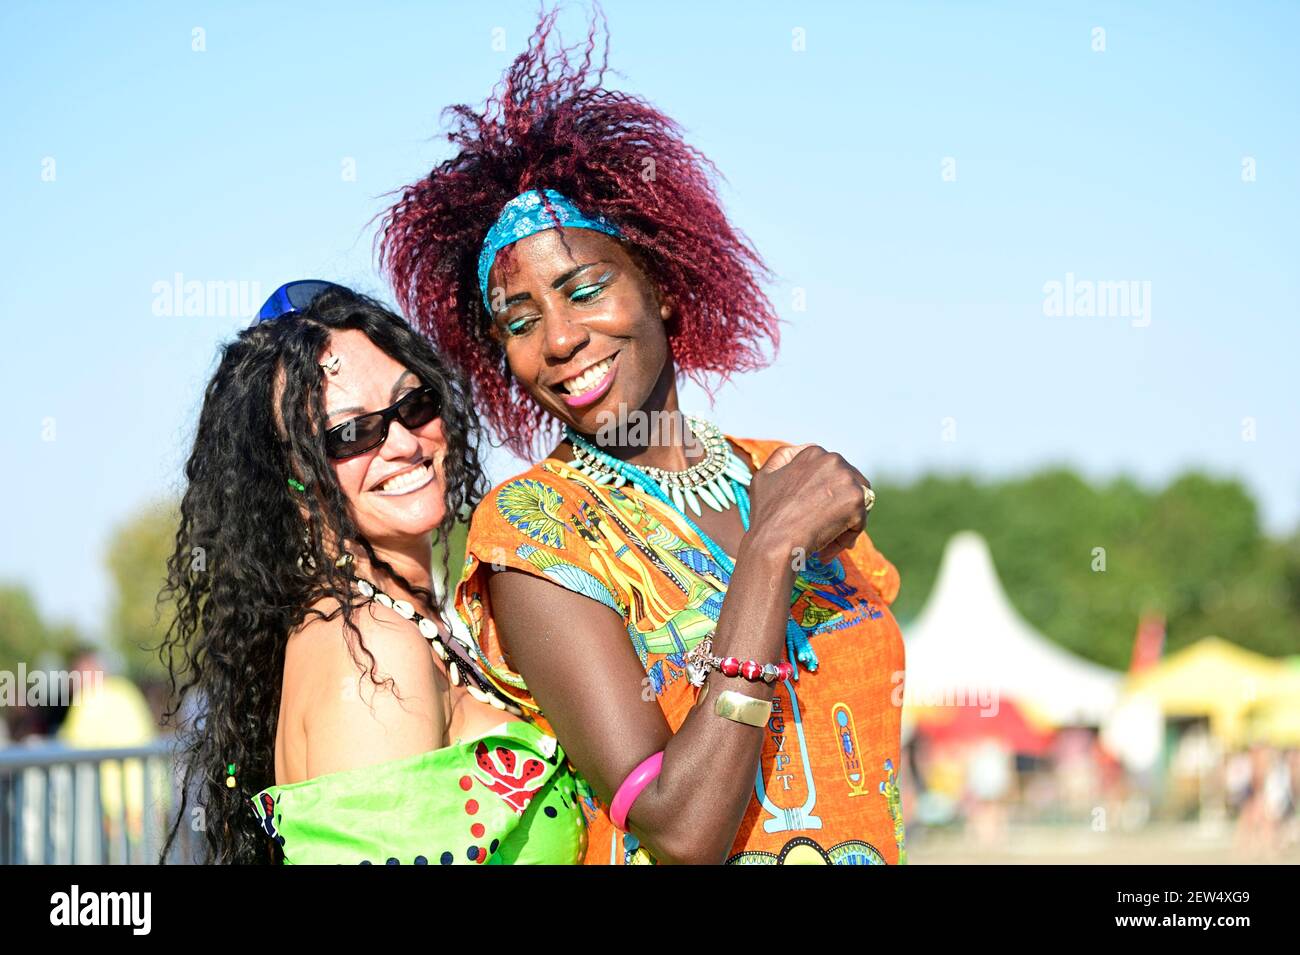 Vienna, Austria. August 10, 2015. Impressions from the 2015 festival season on the Danube Island in Vienna. Two festival goers Stock Photo